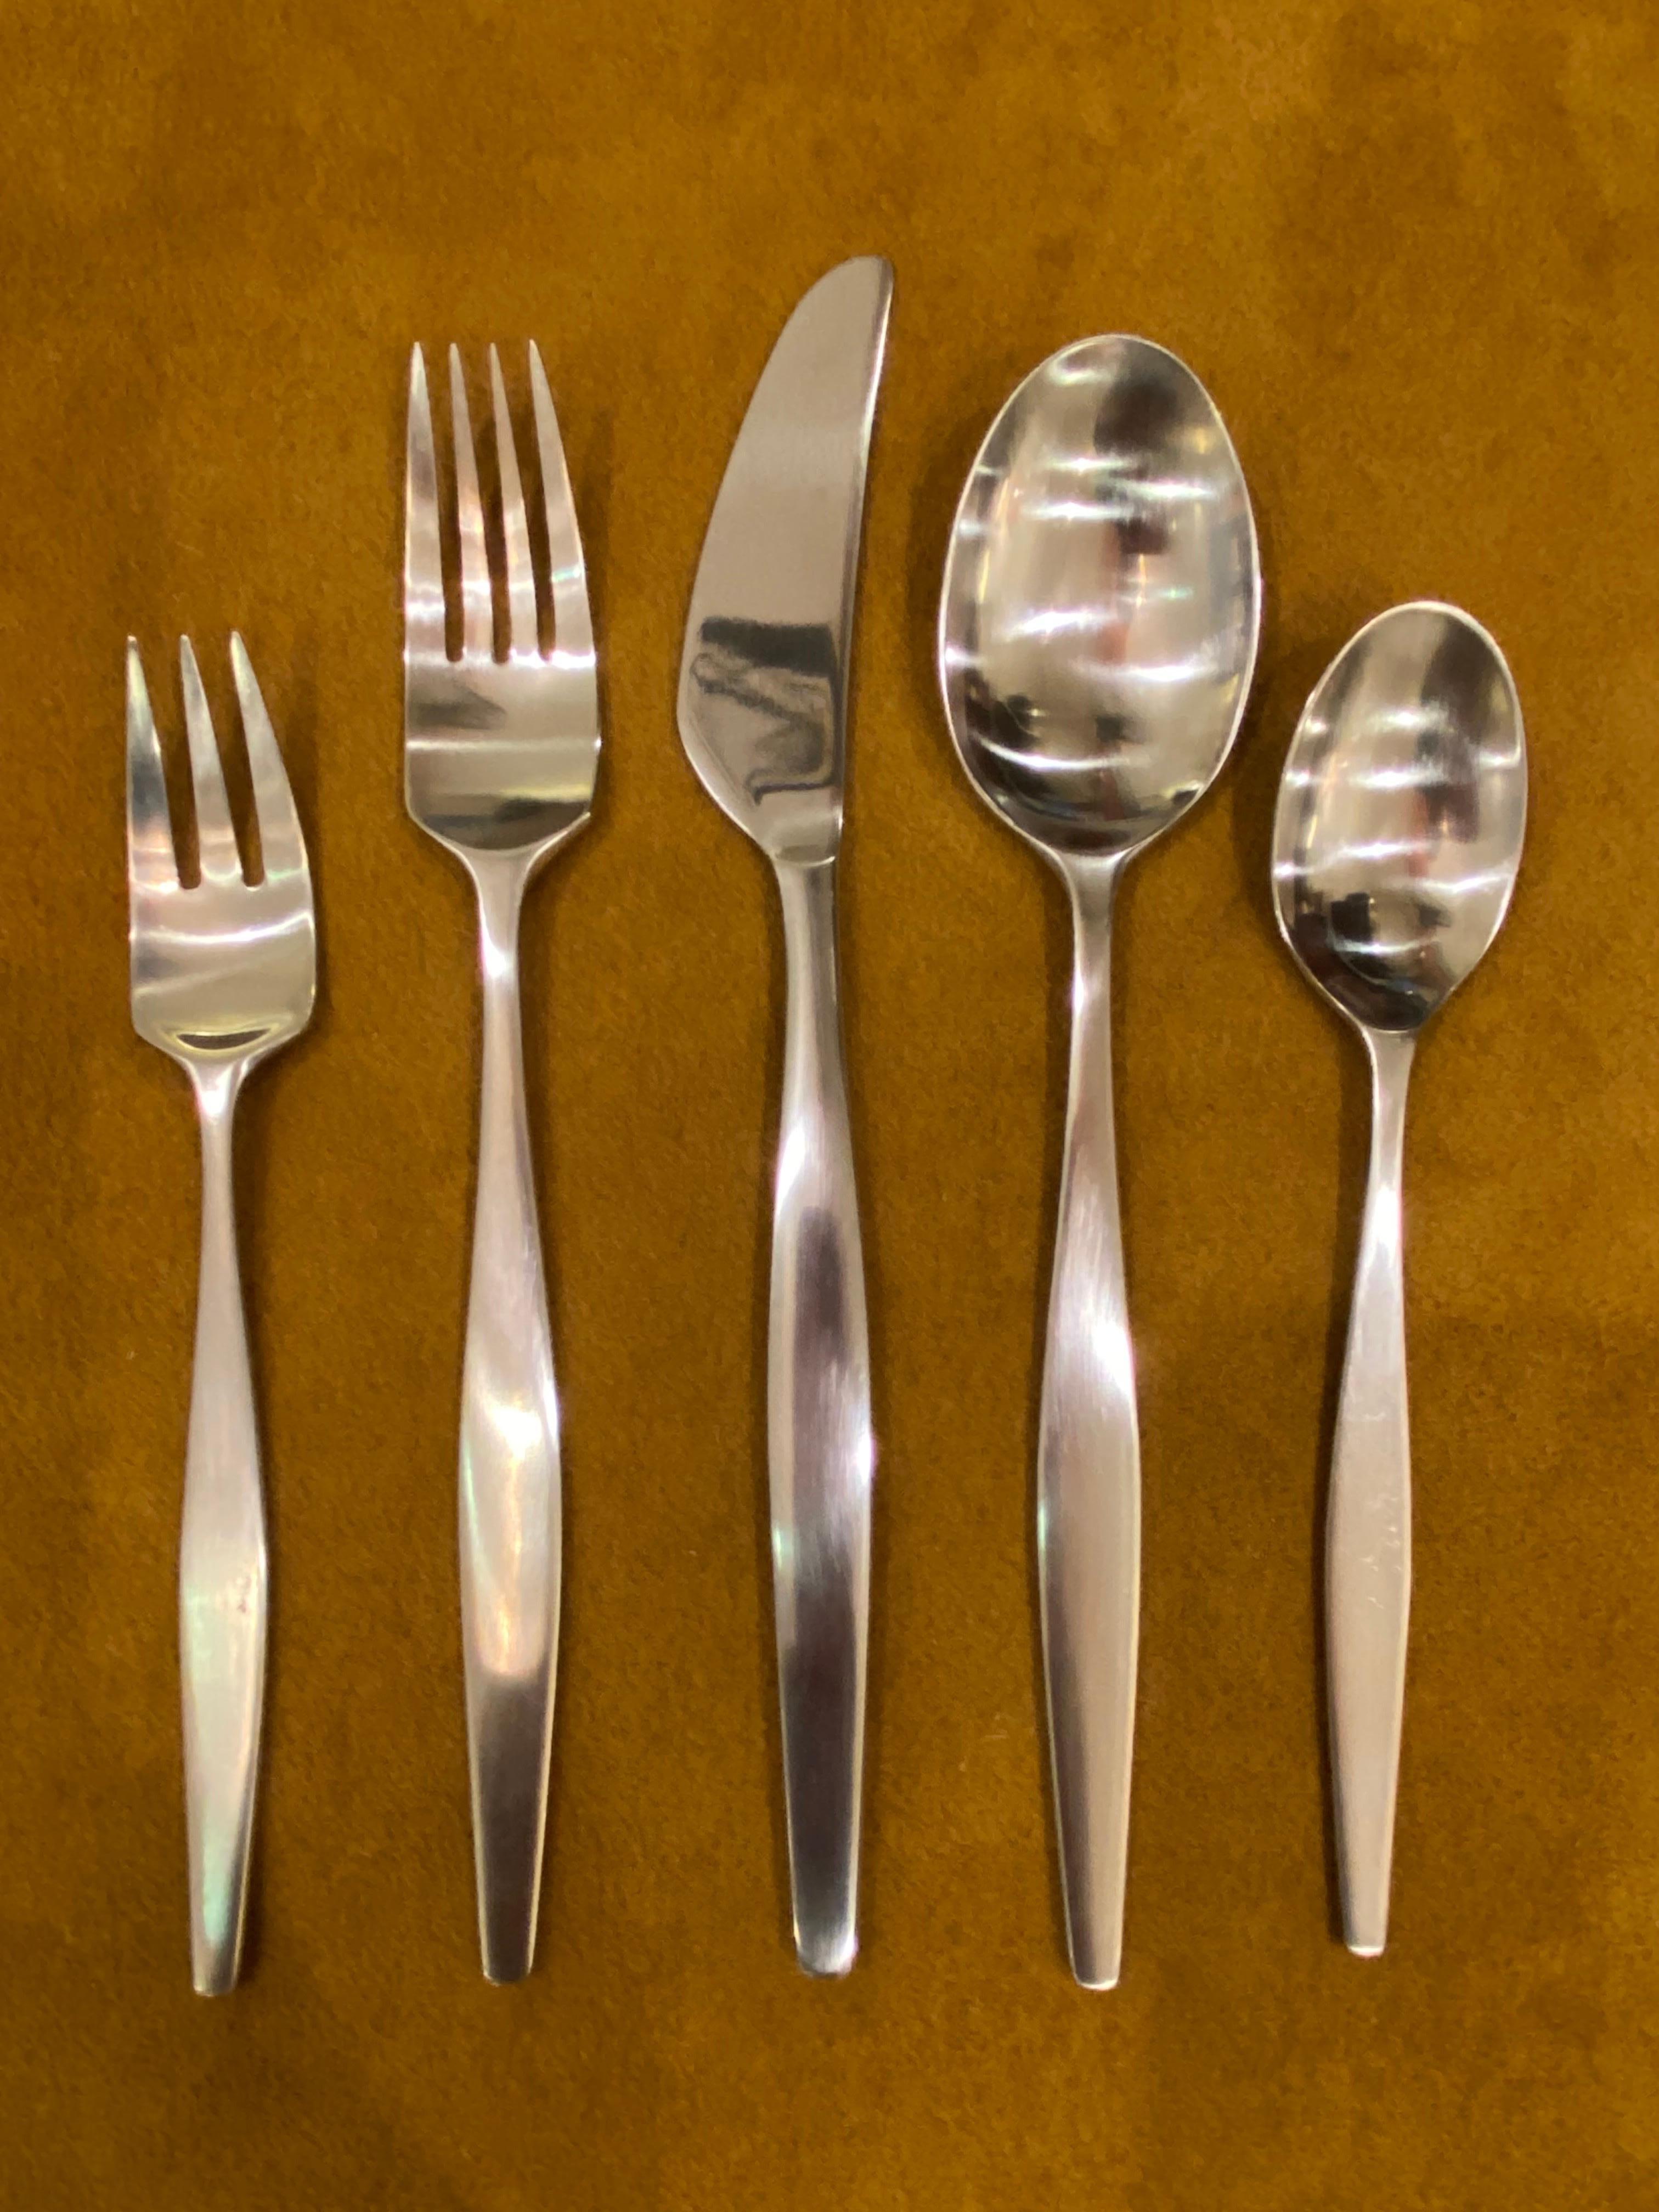 Lauffer Stainless Steel Flatware Set.  Vantage Pattern Service for 10 plus 1 large Serving Spoon and extras!  Most of this set is new and unused, still in plastic sleeves.  Teaspoons are the only pieces that appear with any wear.  Nice Large Set! 